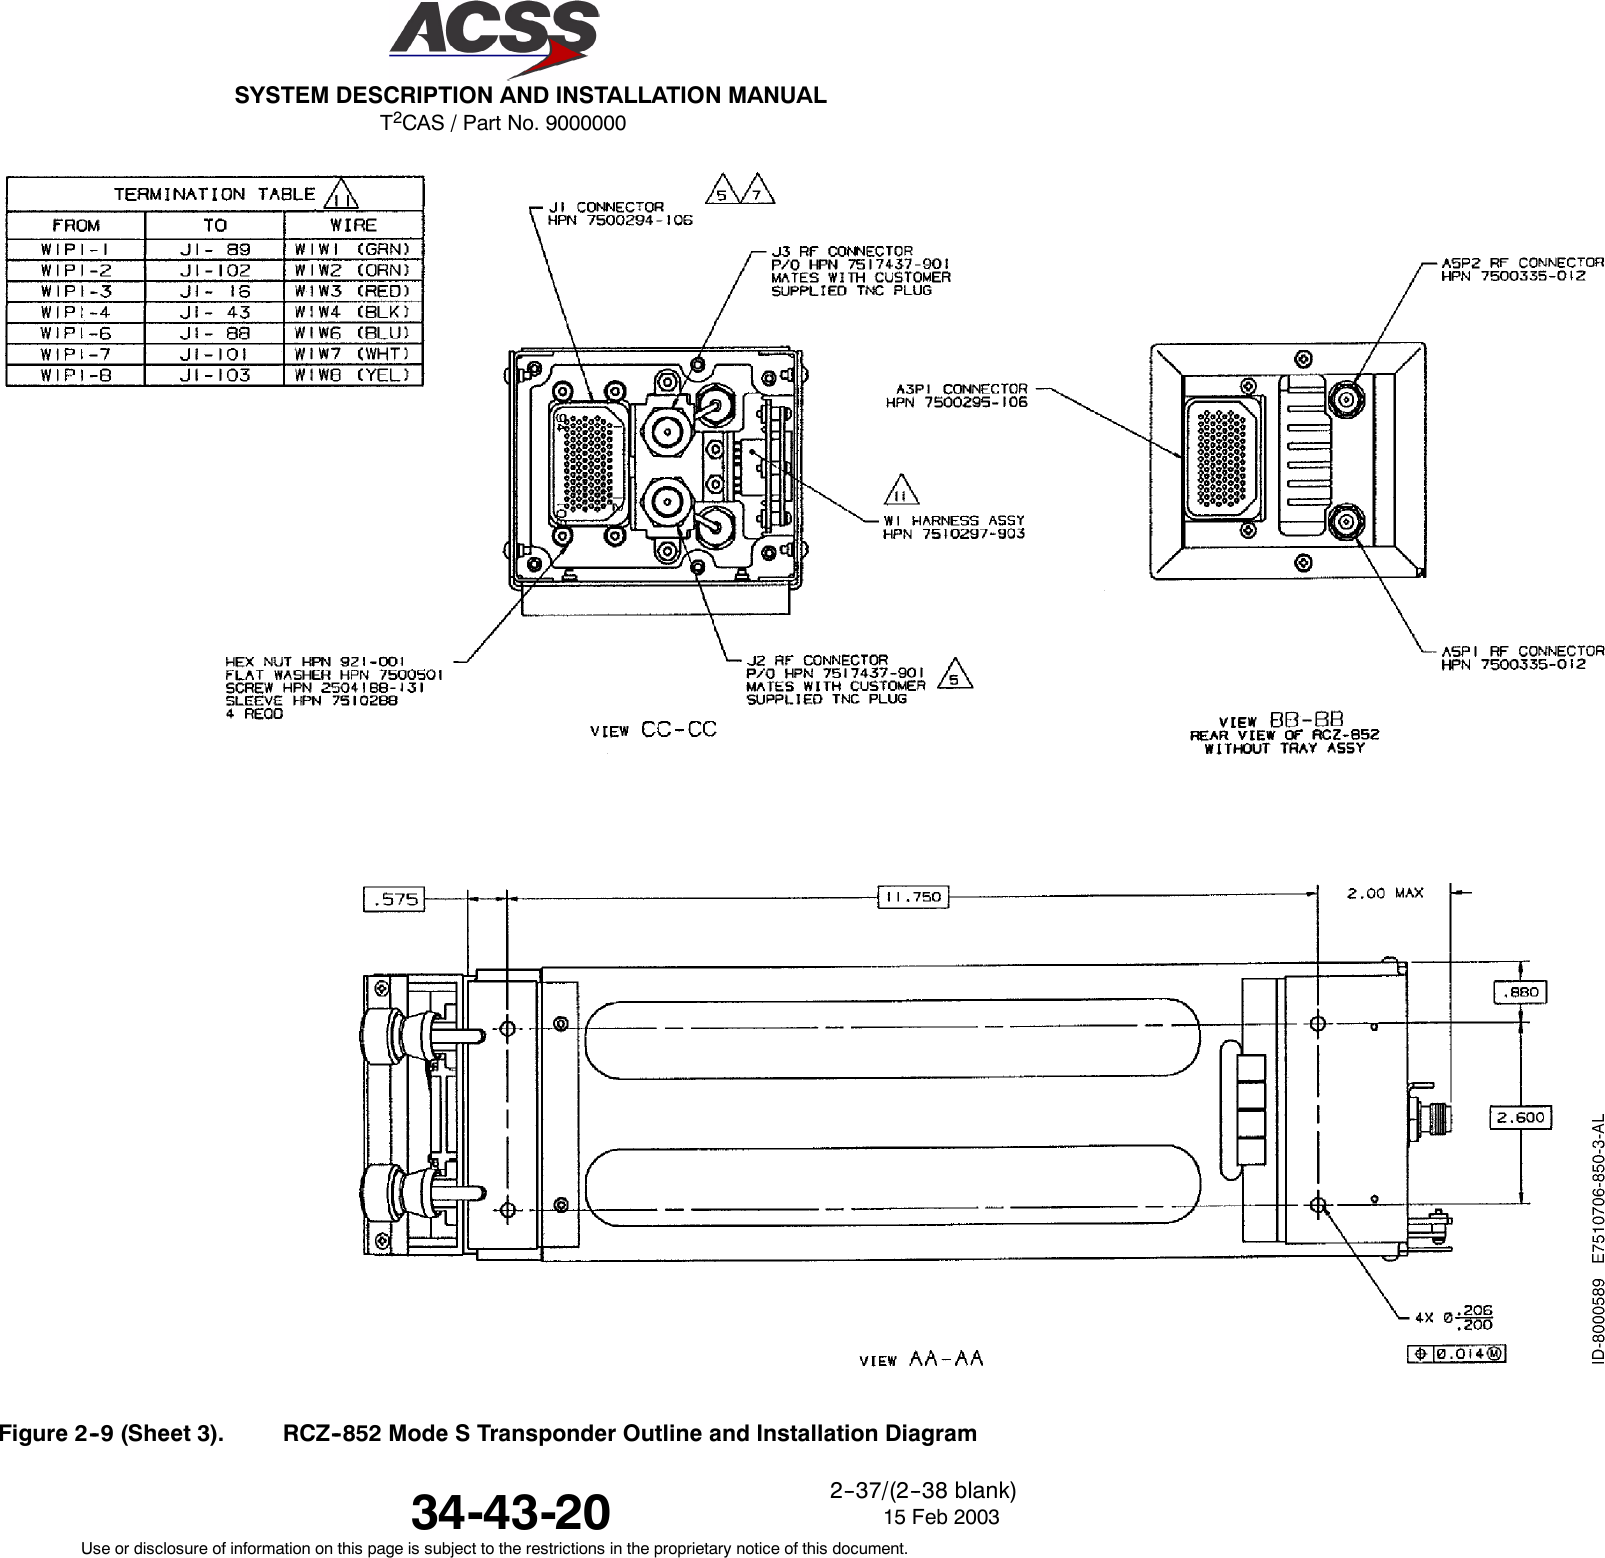 T2CAS / Part No. 9000000SYSTEM DESCRIPTION AND INSTALLATION MANUAL34-43-20 15 Feb 2003Use or disclosure of information on this page is subject to the restrictions in the proprietary notice of this document.2--37/(2--38 blank)Figure 2--9 (Sheet 3). RCZ--852 Mode S Transponder Outline and Installation Diagram